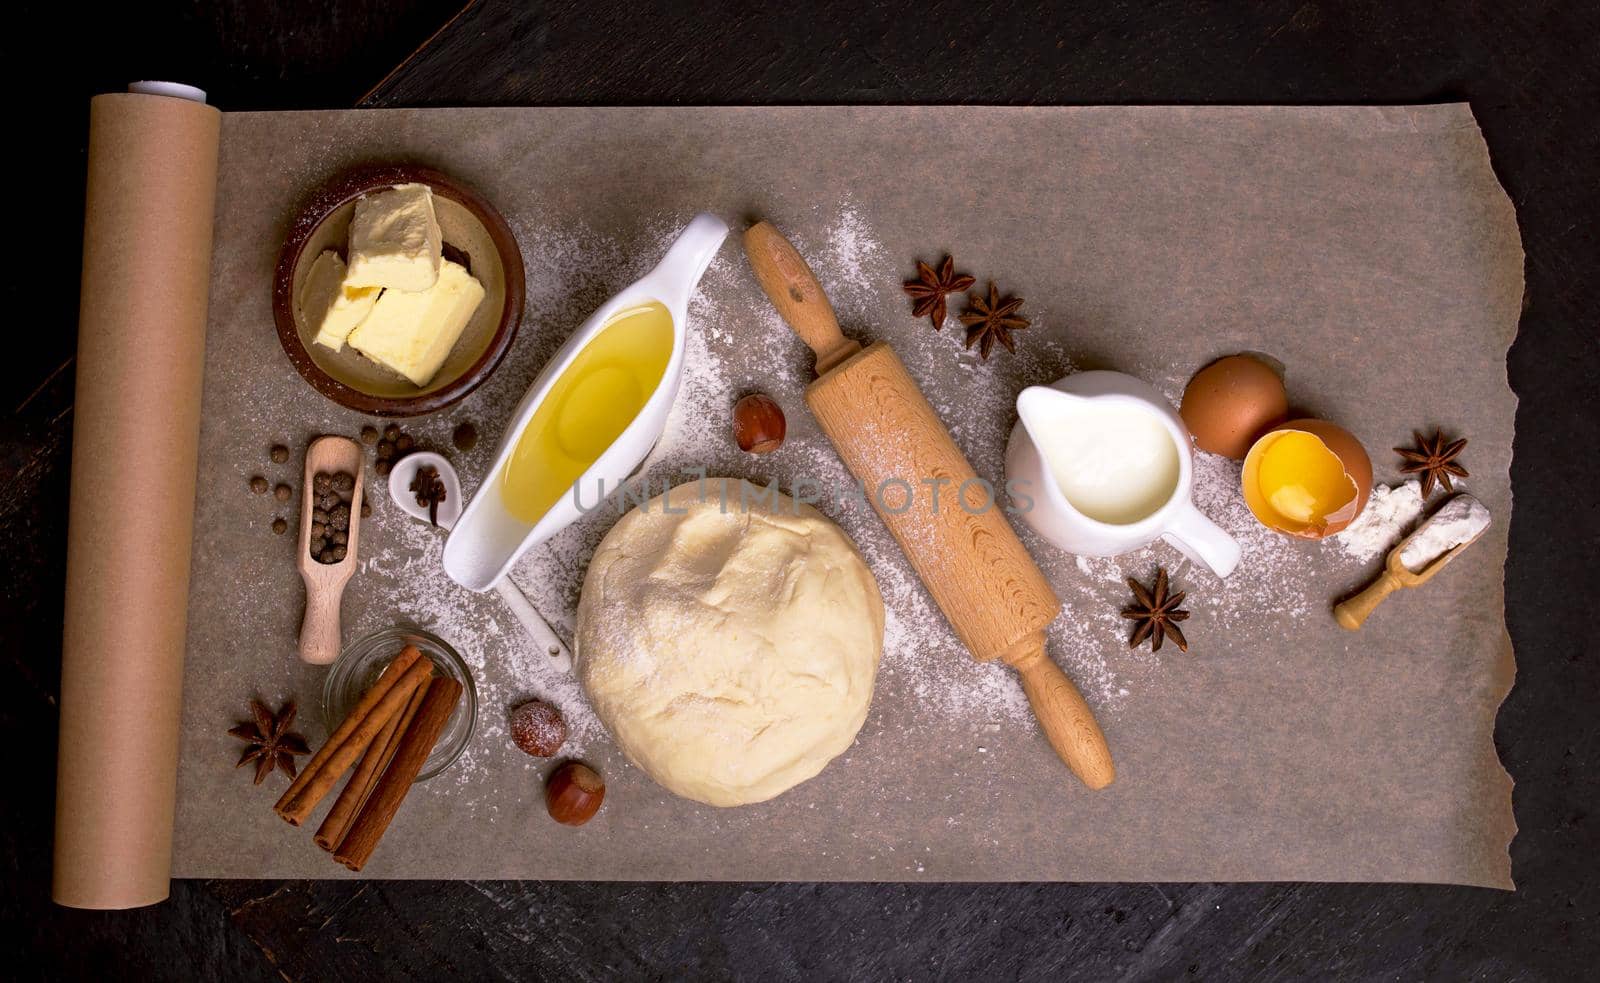 The ingredients for baking cupcake with raisins.